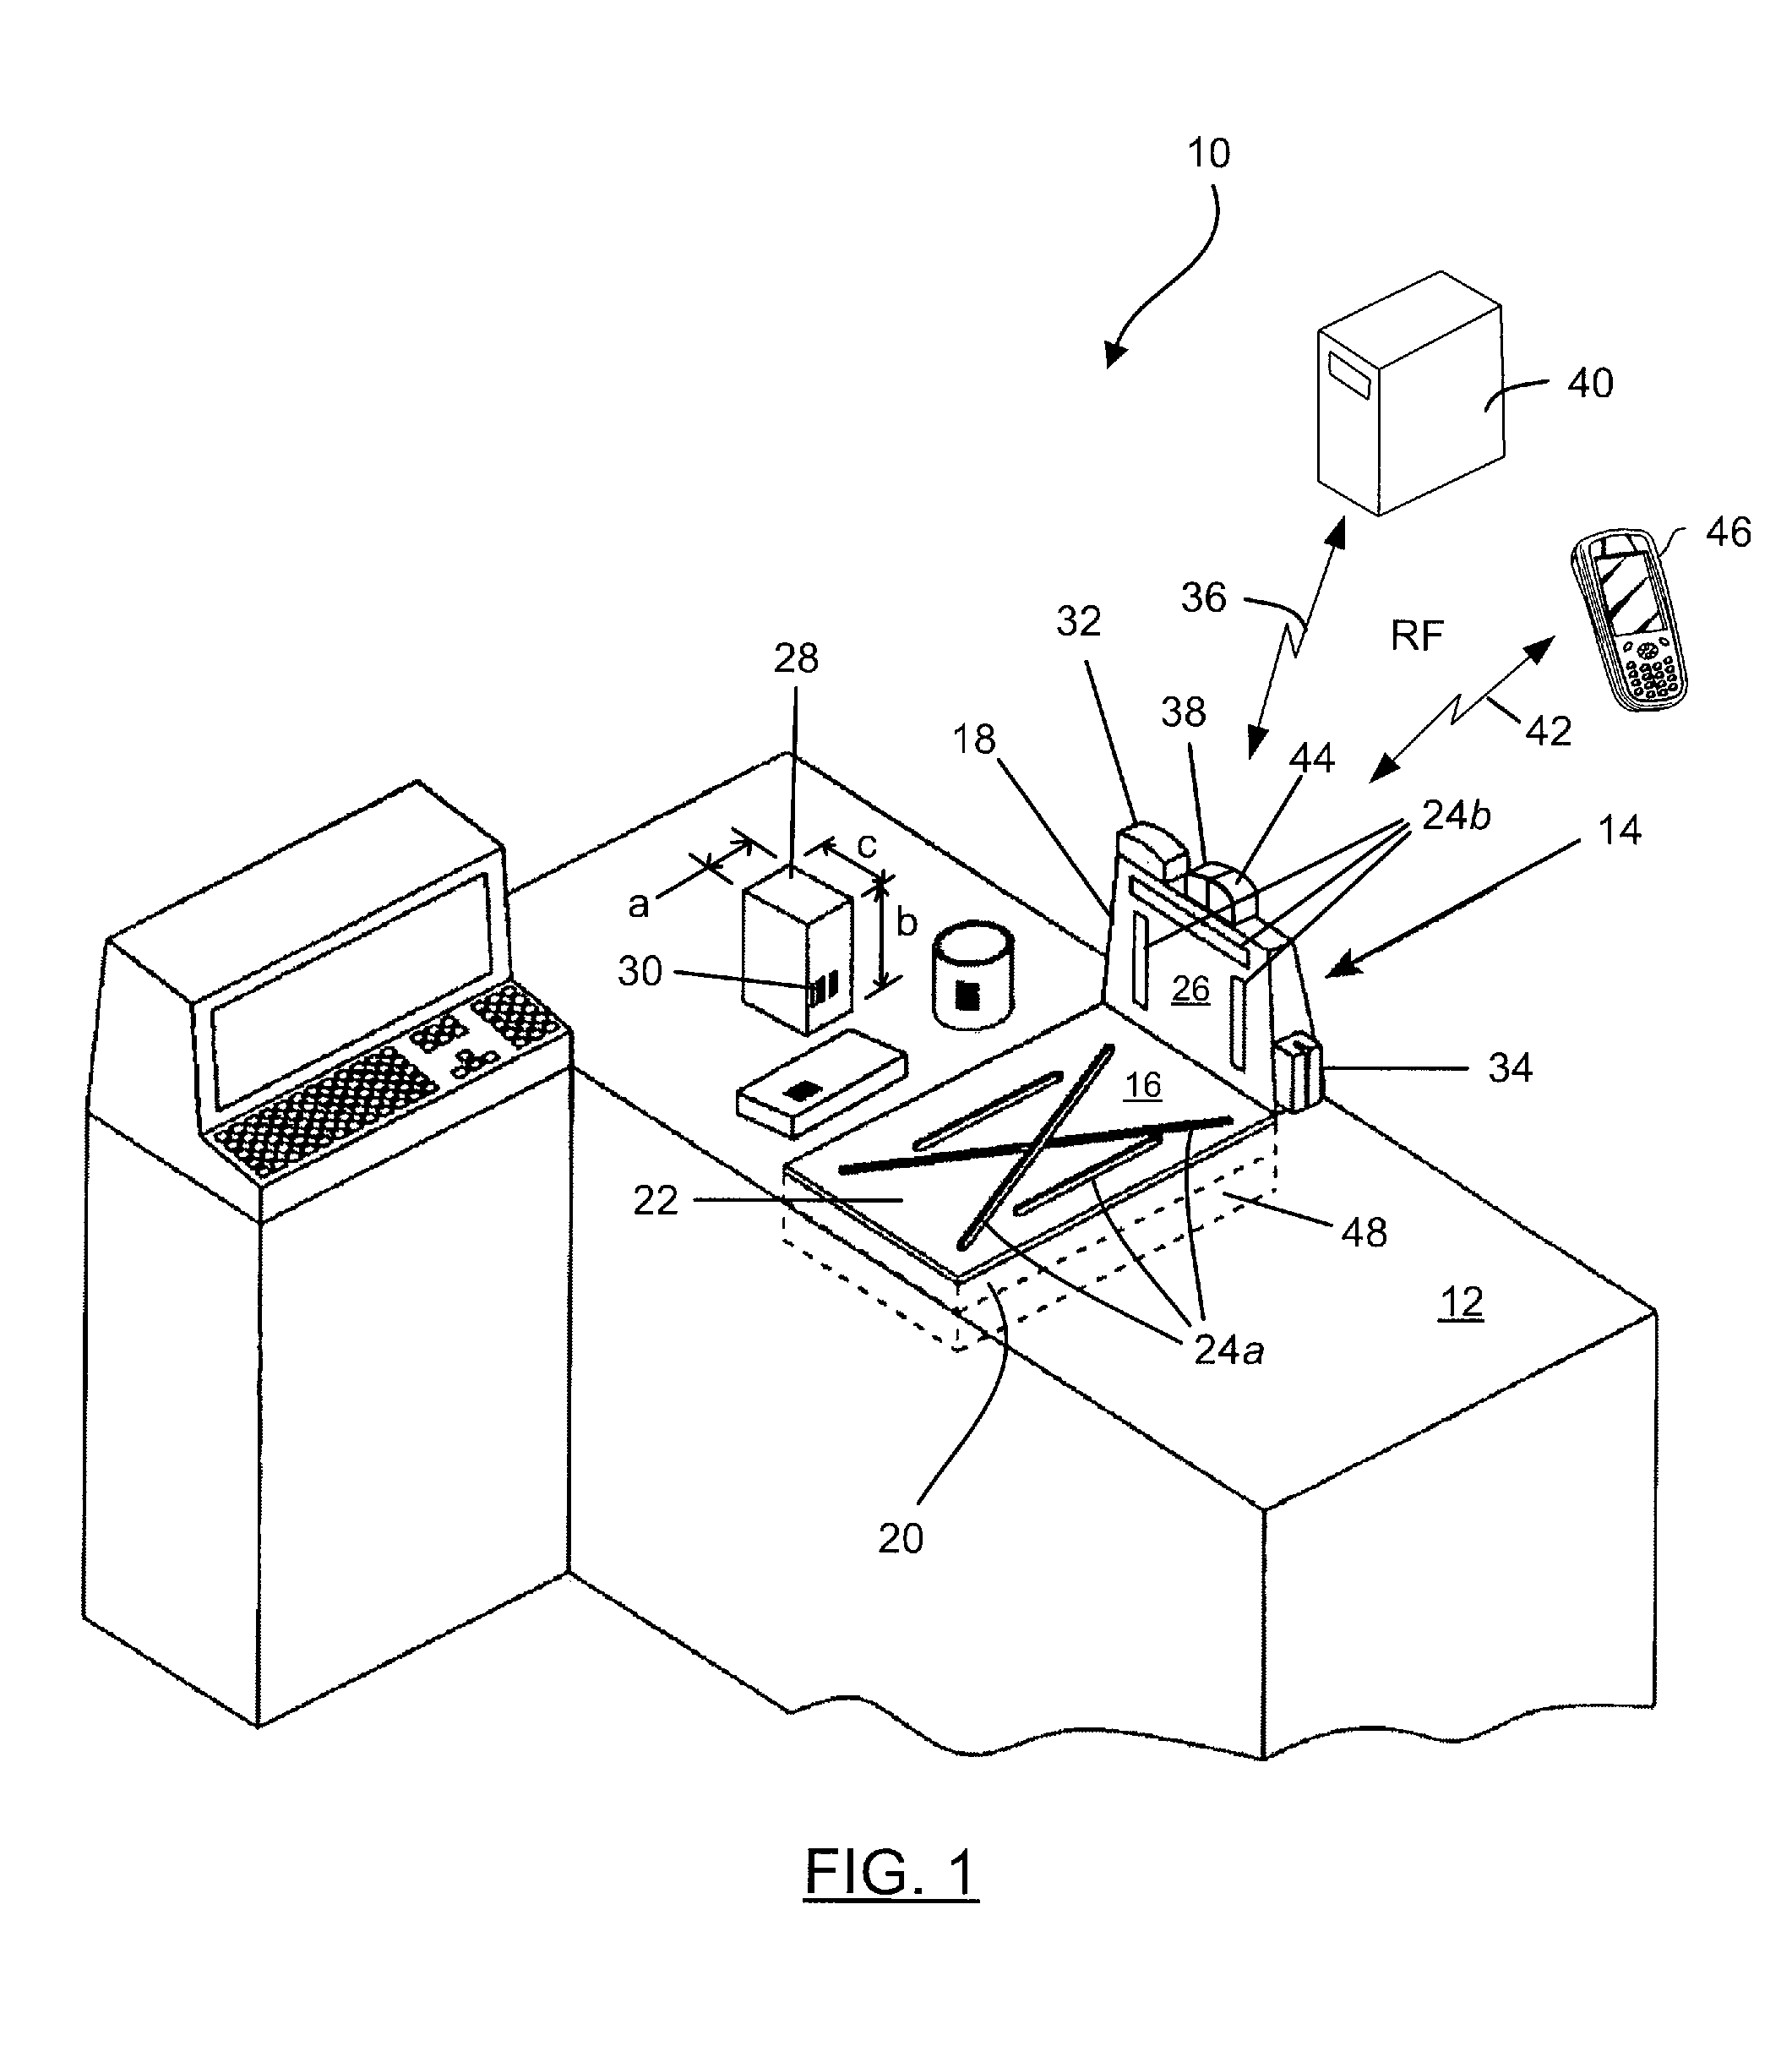 Method and apparatus for reading optical indicia using a plurality of data sources